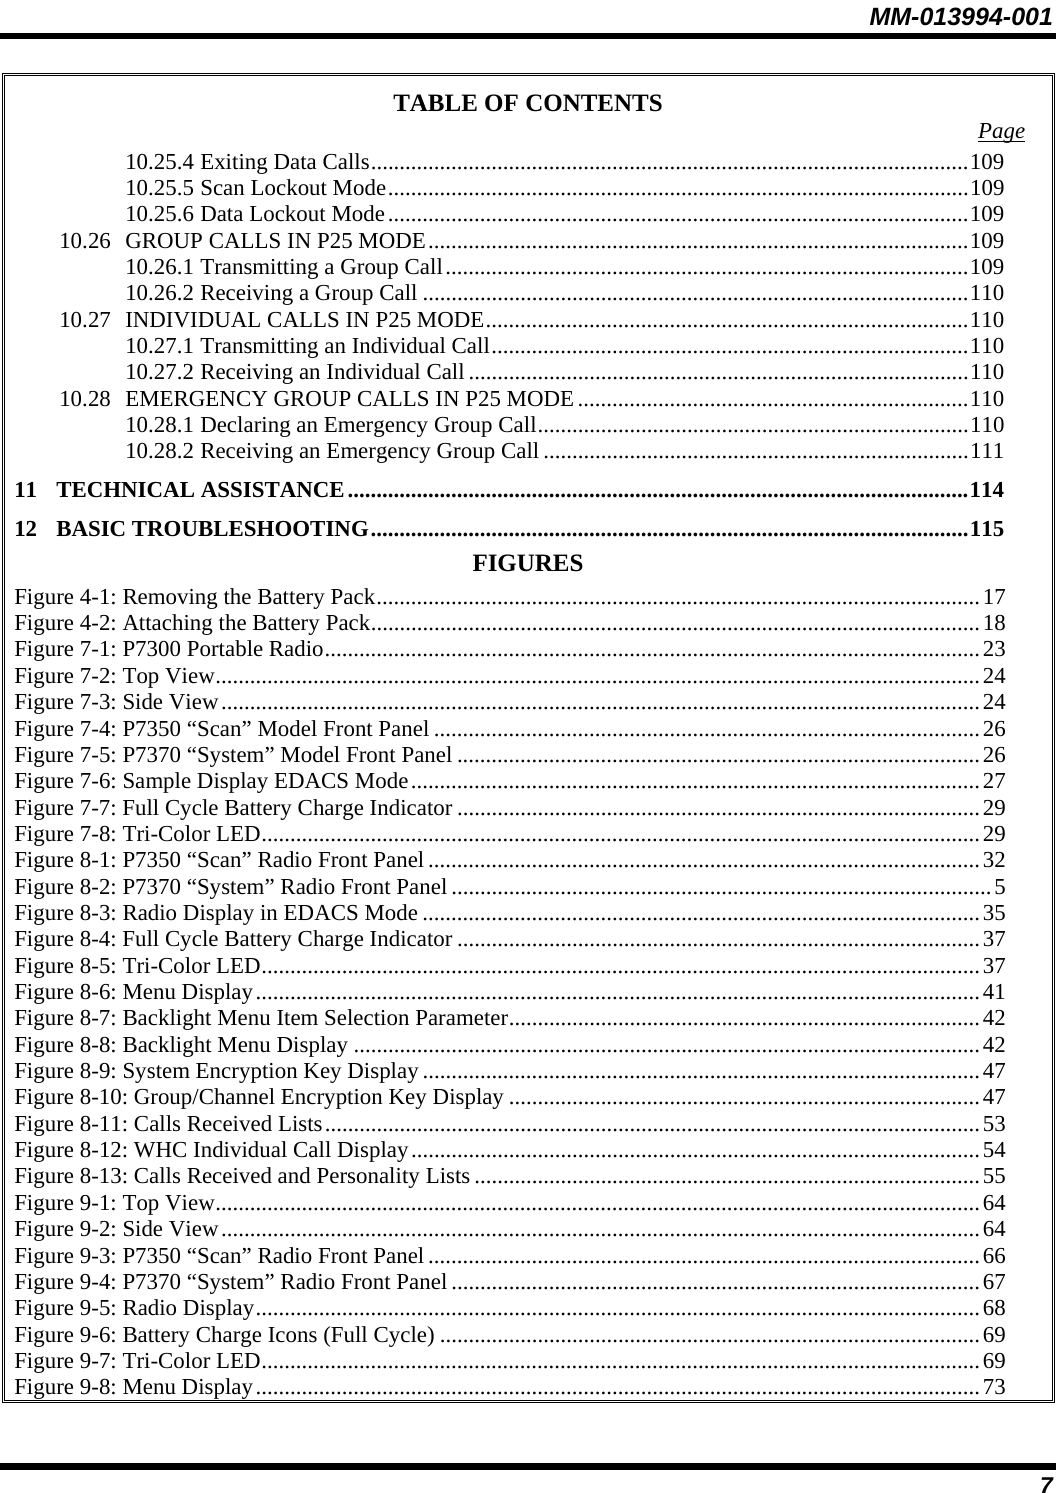 MM-013994-001 7 TABLE OF CONTENTS  Page 10.25.4 Exiting Data Calls........................................................................................................109 10.25.5 Scan Lockout Mode.....................................................................................................109 10.25.6 Data Lockout Mode.....................................................................................................109 10.26 GROUP CALLS IN P25 MODE..............................................................................................109 10.26.1 Transmitting a Group Call...........................................................................................109 10.26.2 Receiving a Group Call ...............................................................................................110 10.27 INDIVIDUAL CALLS IN P25 MODE....................................................................................110 10.27.1 Transmitting an Individual Call...................................................................................110 10.27.2 Receiving an Individual Call .......................................................................................110 10.28 EMERGENCY GROUP CALLS IN P25 MODE....................................................................110 10.28.1 Declaring an Emergency Group Call...........................................................................110 10.28.2 Receiving an Emergency Group Call ..........................................................................111 11 TECHNICAL ASSISTANCE............................................................................................................114 12 BASIC TROUBLESHOOTING........................................................................................................115 FIGURES Figure 4-1: Removing the Battery Pack.........................................................................................................17 Figure 4-2: Attaching the Battery Pack..........................................................................................................18 Figure 7-1: P7300 Portable Radio..................................................................................................................23 Figure 7-2: Top View.....................................................................................................................................24 Figure 7-3: Side View....................................................................................................................................24 Figure 7-4: P7350 “Scan” Model Front Panel ...............................................................................................26 Figure 7-5: P7370 “System” Model Front Panel ...........................................................................................26 Figure 7-6: Sample Display EDACS Mode...................................................................................................27 Figure 7-7: Full Cycle Battery Charge Indicator ...........................................................................................29 Figure 7-8: Tri-Color LED.............................................................................................................................29 Figure 8-1: P7350 “Scan” Radio Front Panel................................................................................................32 Figure 8-2: P7370 “System” Radio Front Panel ..............................................................................................5 Figure 8-3: Radio Display in EDACS Mode .................................................................................................35 Figure 8-4: Full Cycle Battery Charge Indicator ...........................................................................................37 Figure 8-5: Tri-Color LED.............................................................................................................................37 Figure 8-6: Menu Display..............................................................................................................................41 Figure 8-7: Backlight Menu Item Selection Parameter..................................................................................42 Figure 8-8: Backlight Menu Display .............................................................................................................42 Figure 8-9: System Encryption Key Display .................................................................................................47 Figure 8-10: Group/Channel Encryption Key Display ..................................................................................47 Figure 8-11: Calls Received Lists..................................................................................................................53 Figure 8-12: WHC Individual Call Display...................................................................................................54 Figure 8-13: Calls Received and Personality Lists ........................................................................................55 Figure 9-1: Top View.....................................................................................................................................64 Figure 9-2: Side View....................................................................................................................................64 Figure 9-3: P7350 “Scan” Radio Front Panel................................................................................................66 Figure 9-4: P7370 “System” Radio Front Panel ............................................................................................67 Figure 9-5: Radio Display..............................................................................................................................68 Figure 9-6: Battery Charge Icons (Full Cycle) ..............................................................................................69 Figure 9-7: Tri-Color LED.............................................................................................................................69 Figure 9-8: Menu Display..............................................................................................................................73 